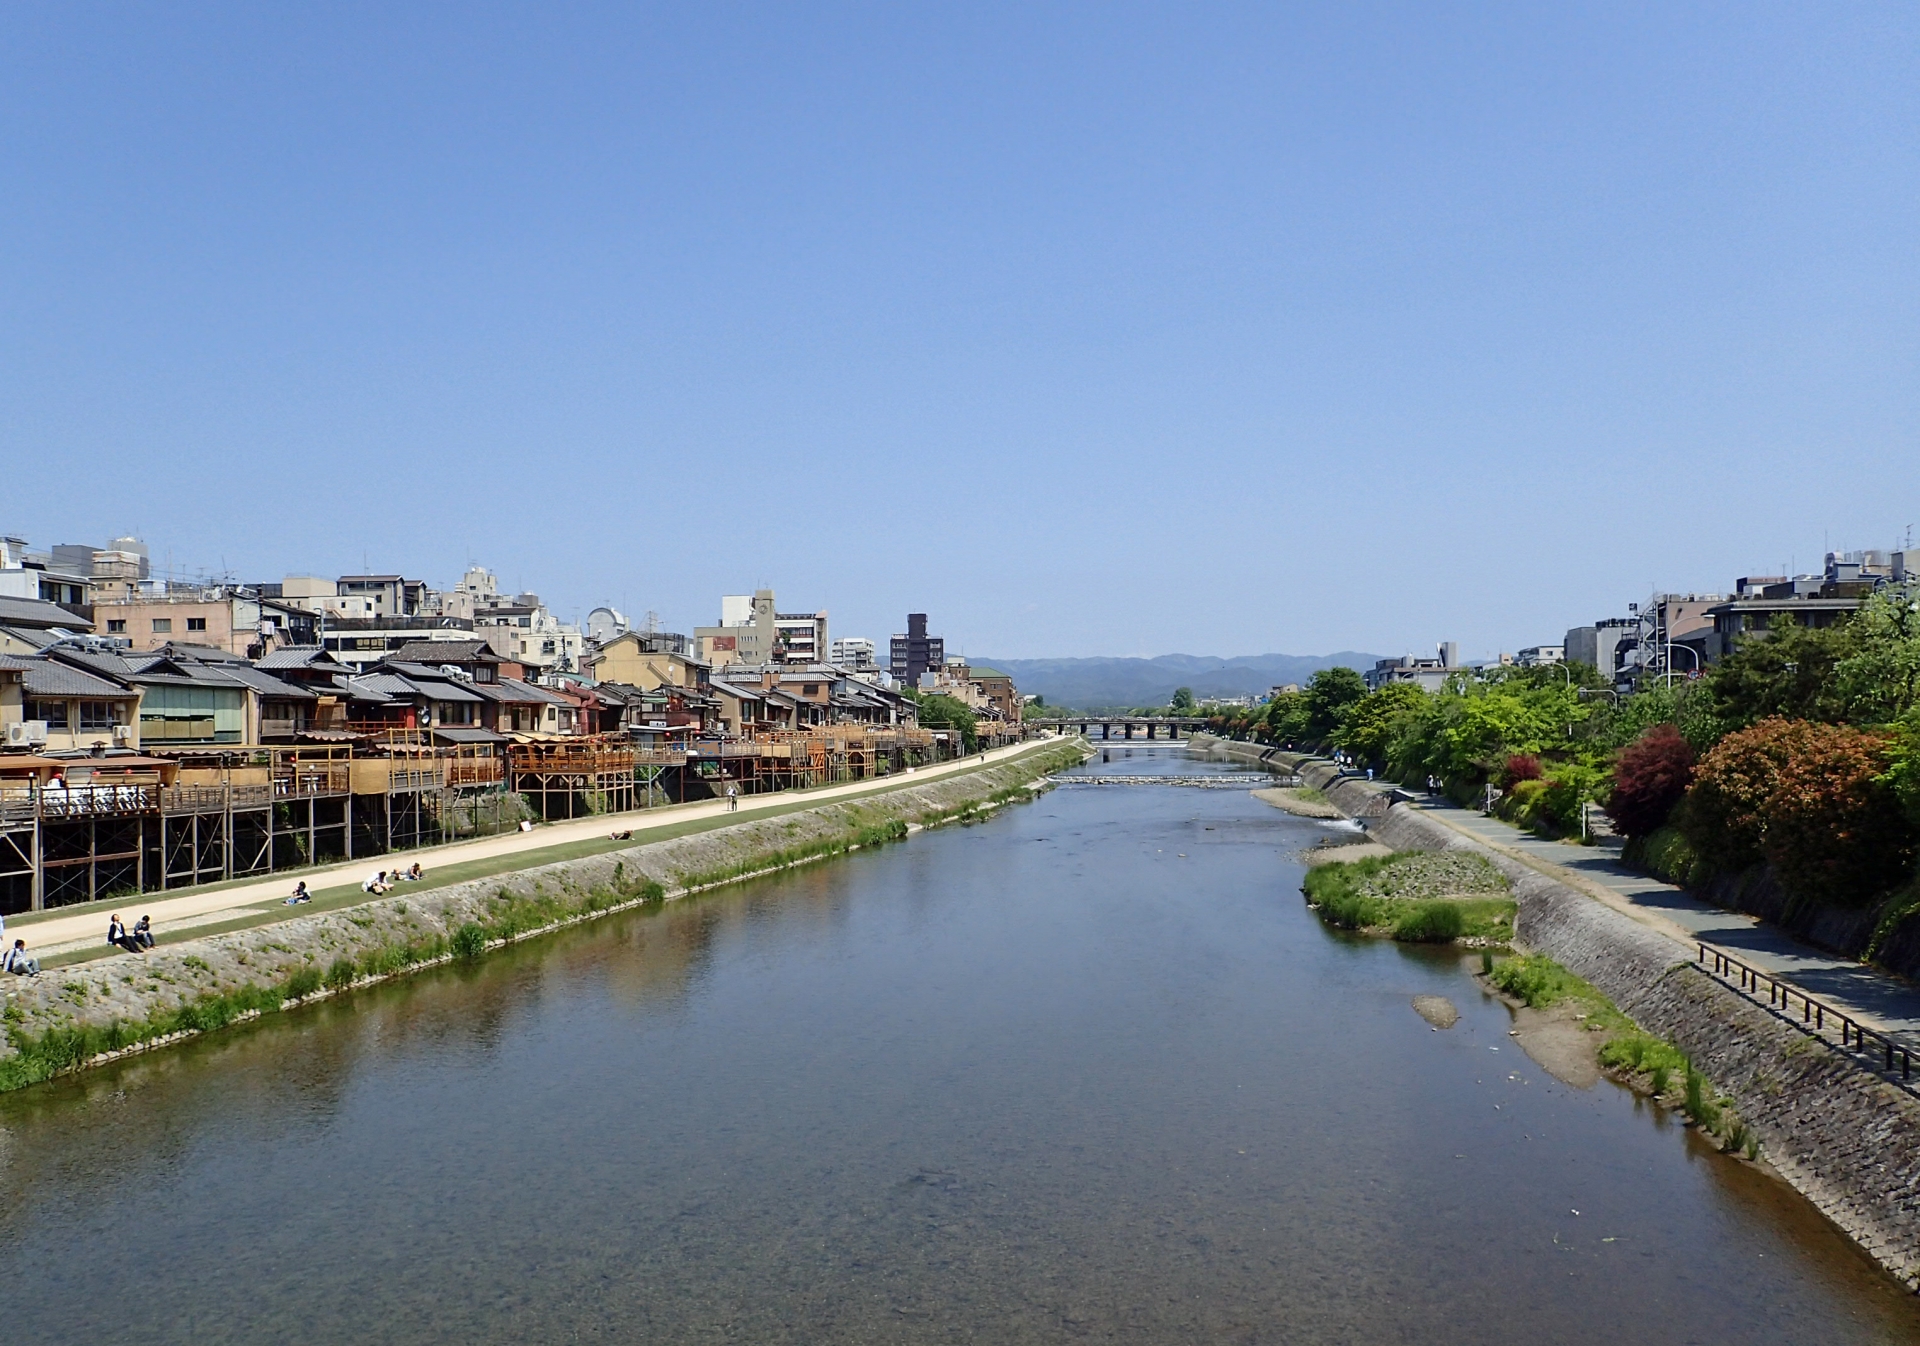 Must-See for Kyoto New-Comers! A Guide to the Areas of Kyoto